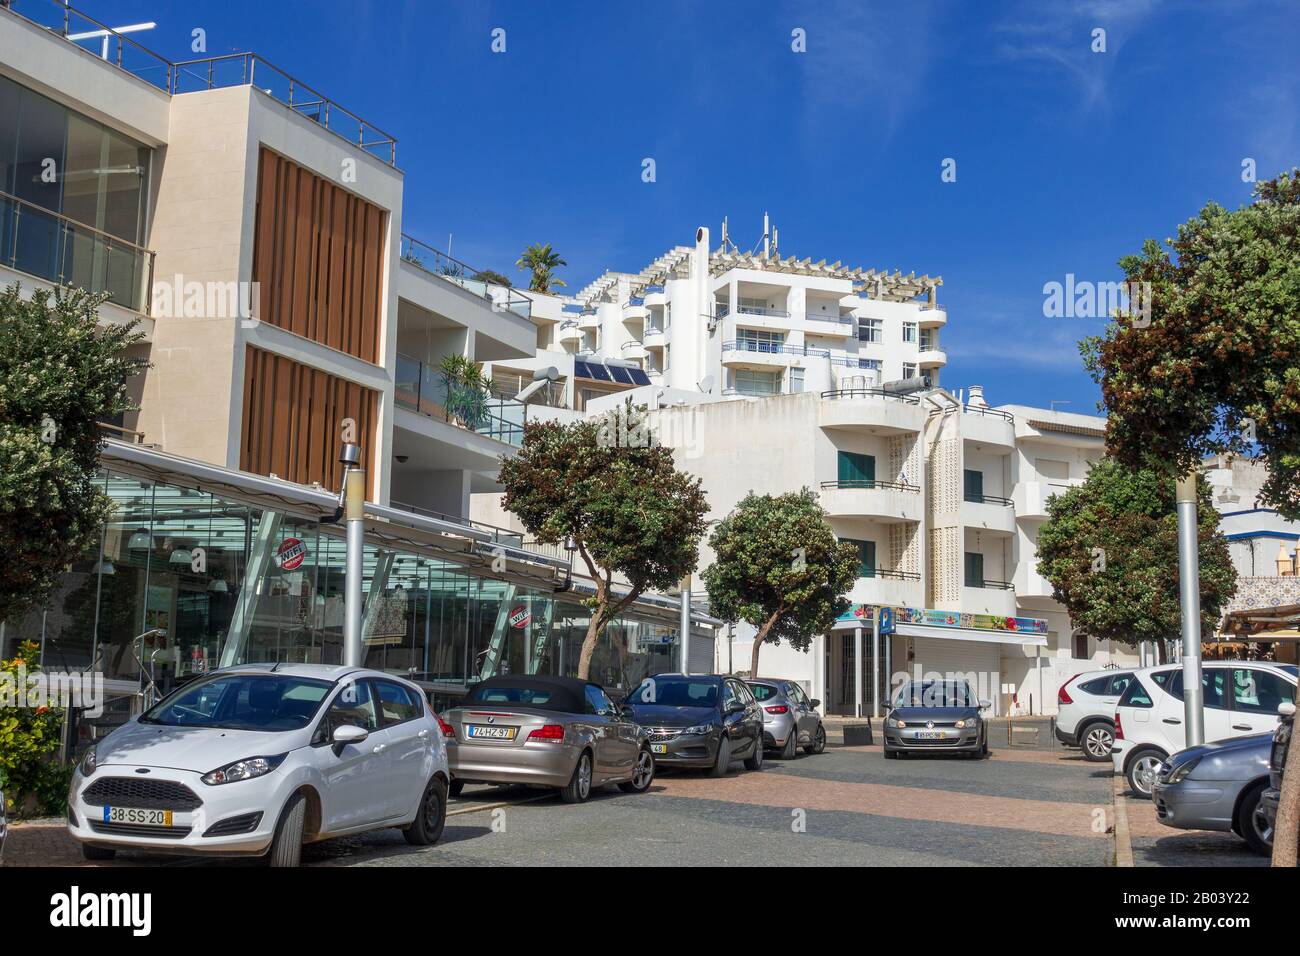 Shops And Restaurants On The Main Street Of Olhos De Agua A Popular Resort Town In The Algarve Portugal Stock Photo